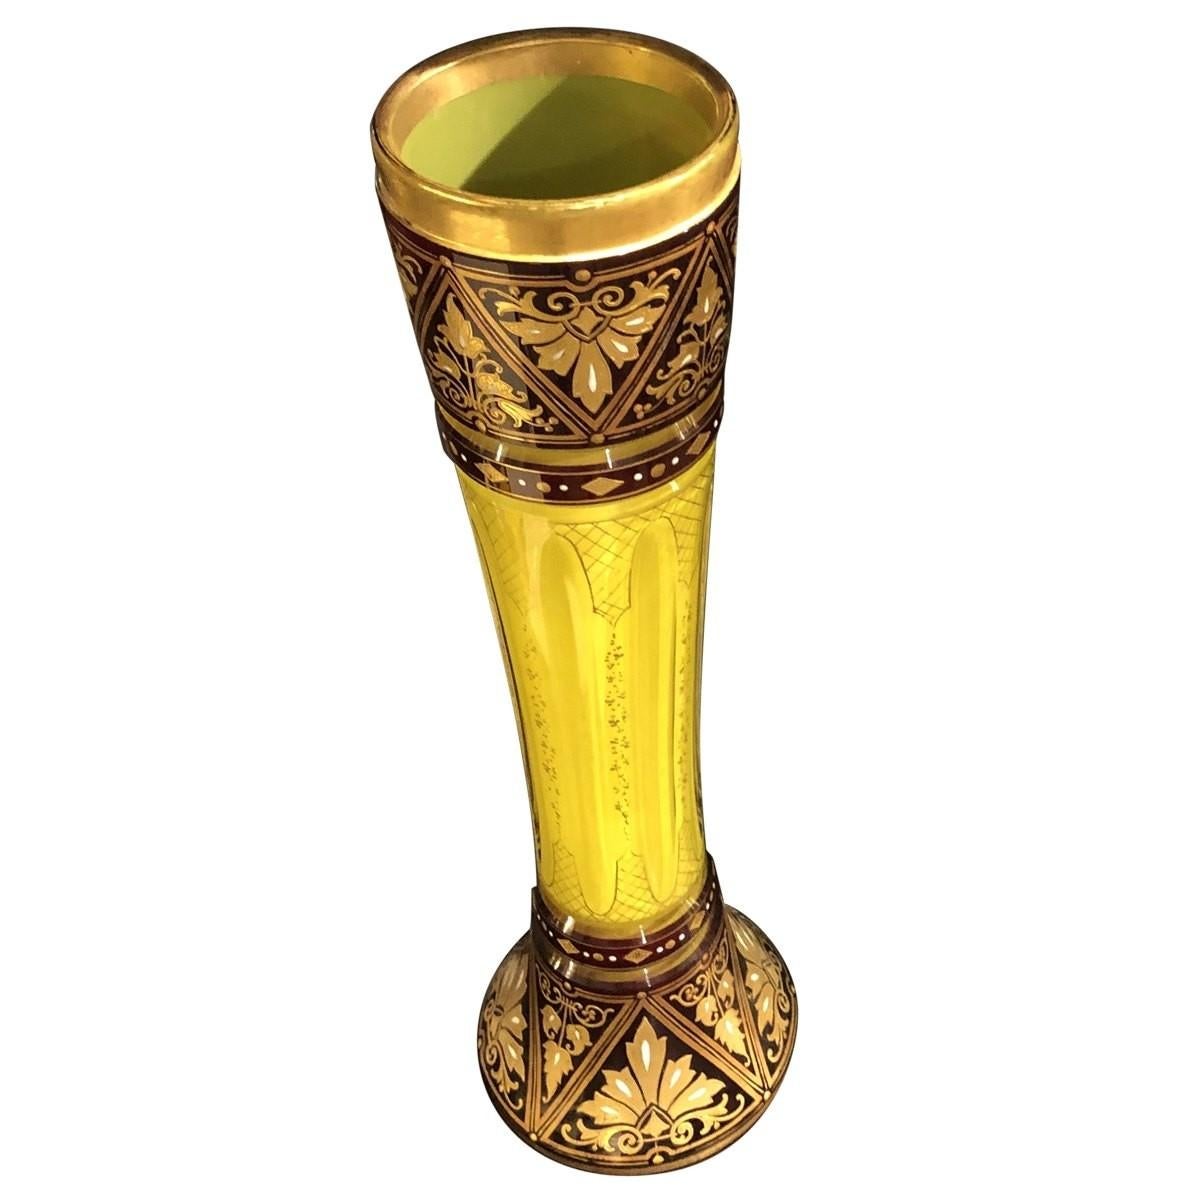 This cut and enameled vase is stately and elegant. The vase is decorated with the Moser style with raised gilt design on burgundy enamel ground. The interior is flashed in vibrant yellow, bringing in warmth and brightness to your space. Place this